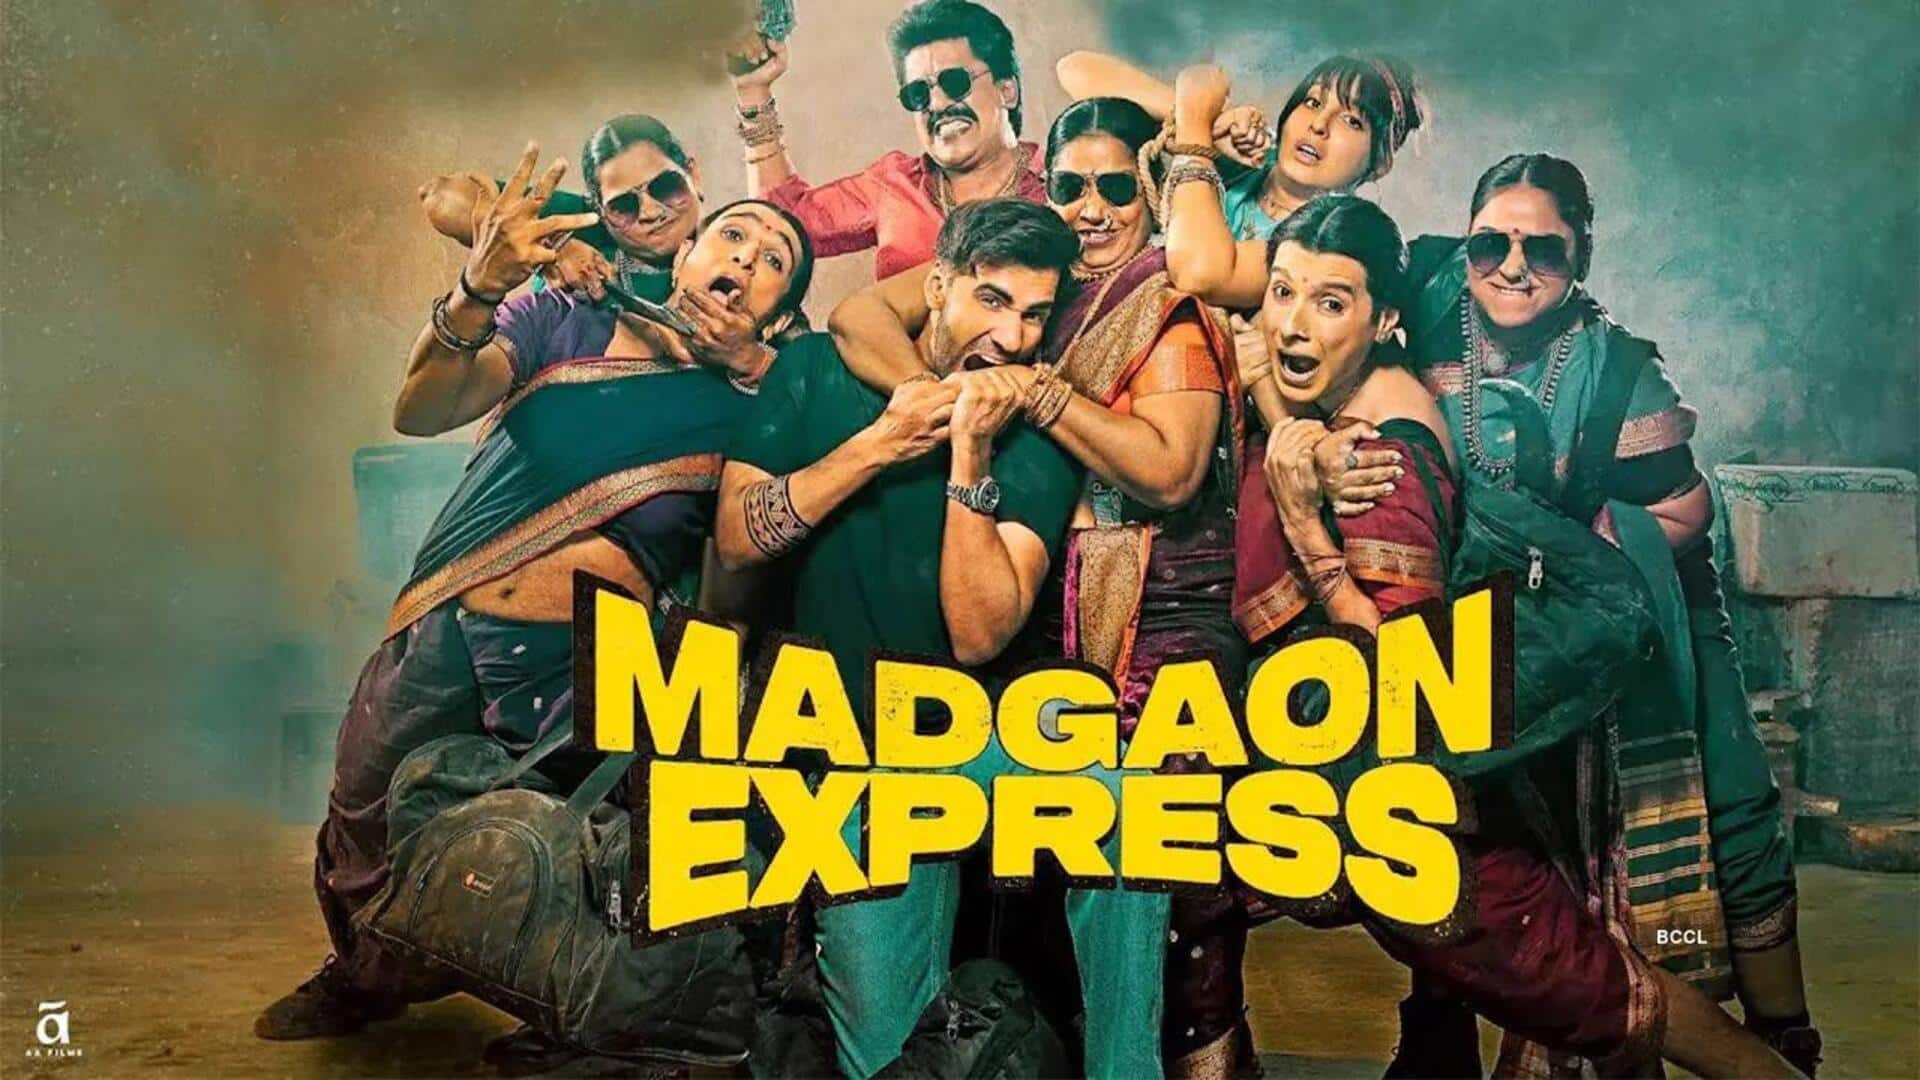 Box office collection: 'Madgaon Express' aims for a lucrative weekend